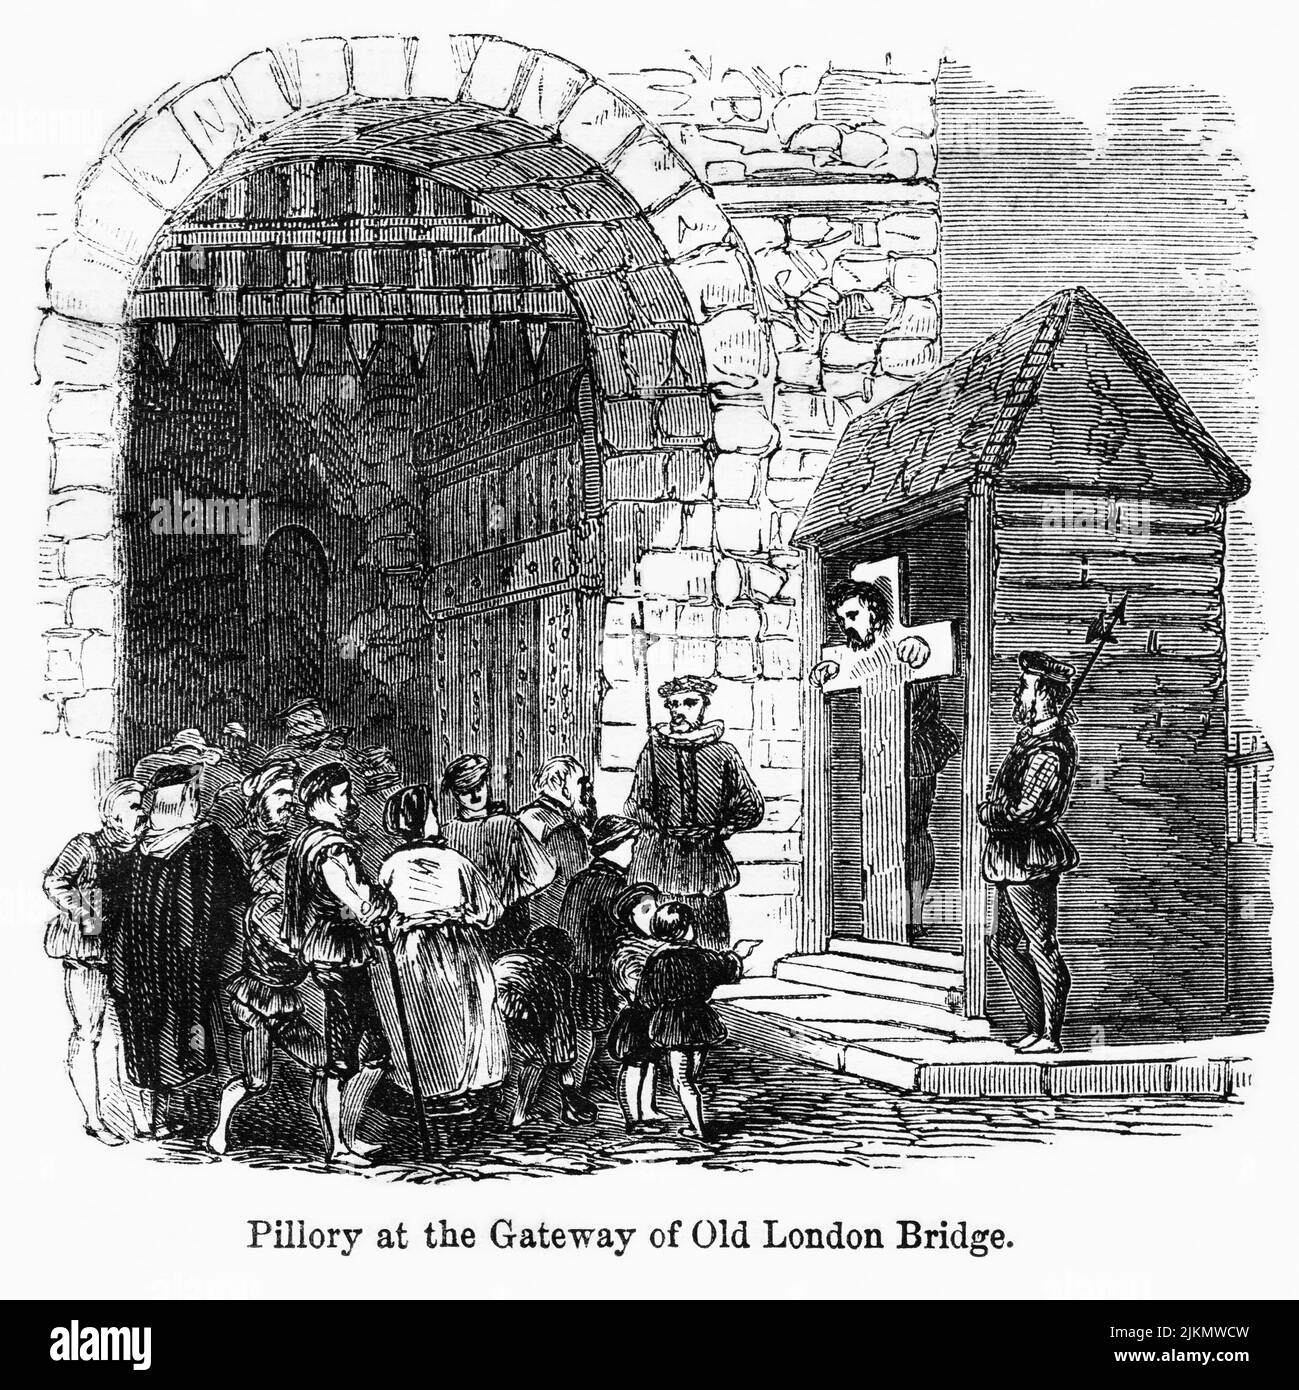 Pillory at the Gateway of Old London Bridge, Illustration from the Book, 'John Cassel’s Illustrated History of England, Volume II', text by William Howitt, Cassell, Petter, and Galpin, London, 1858 Stock Photo